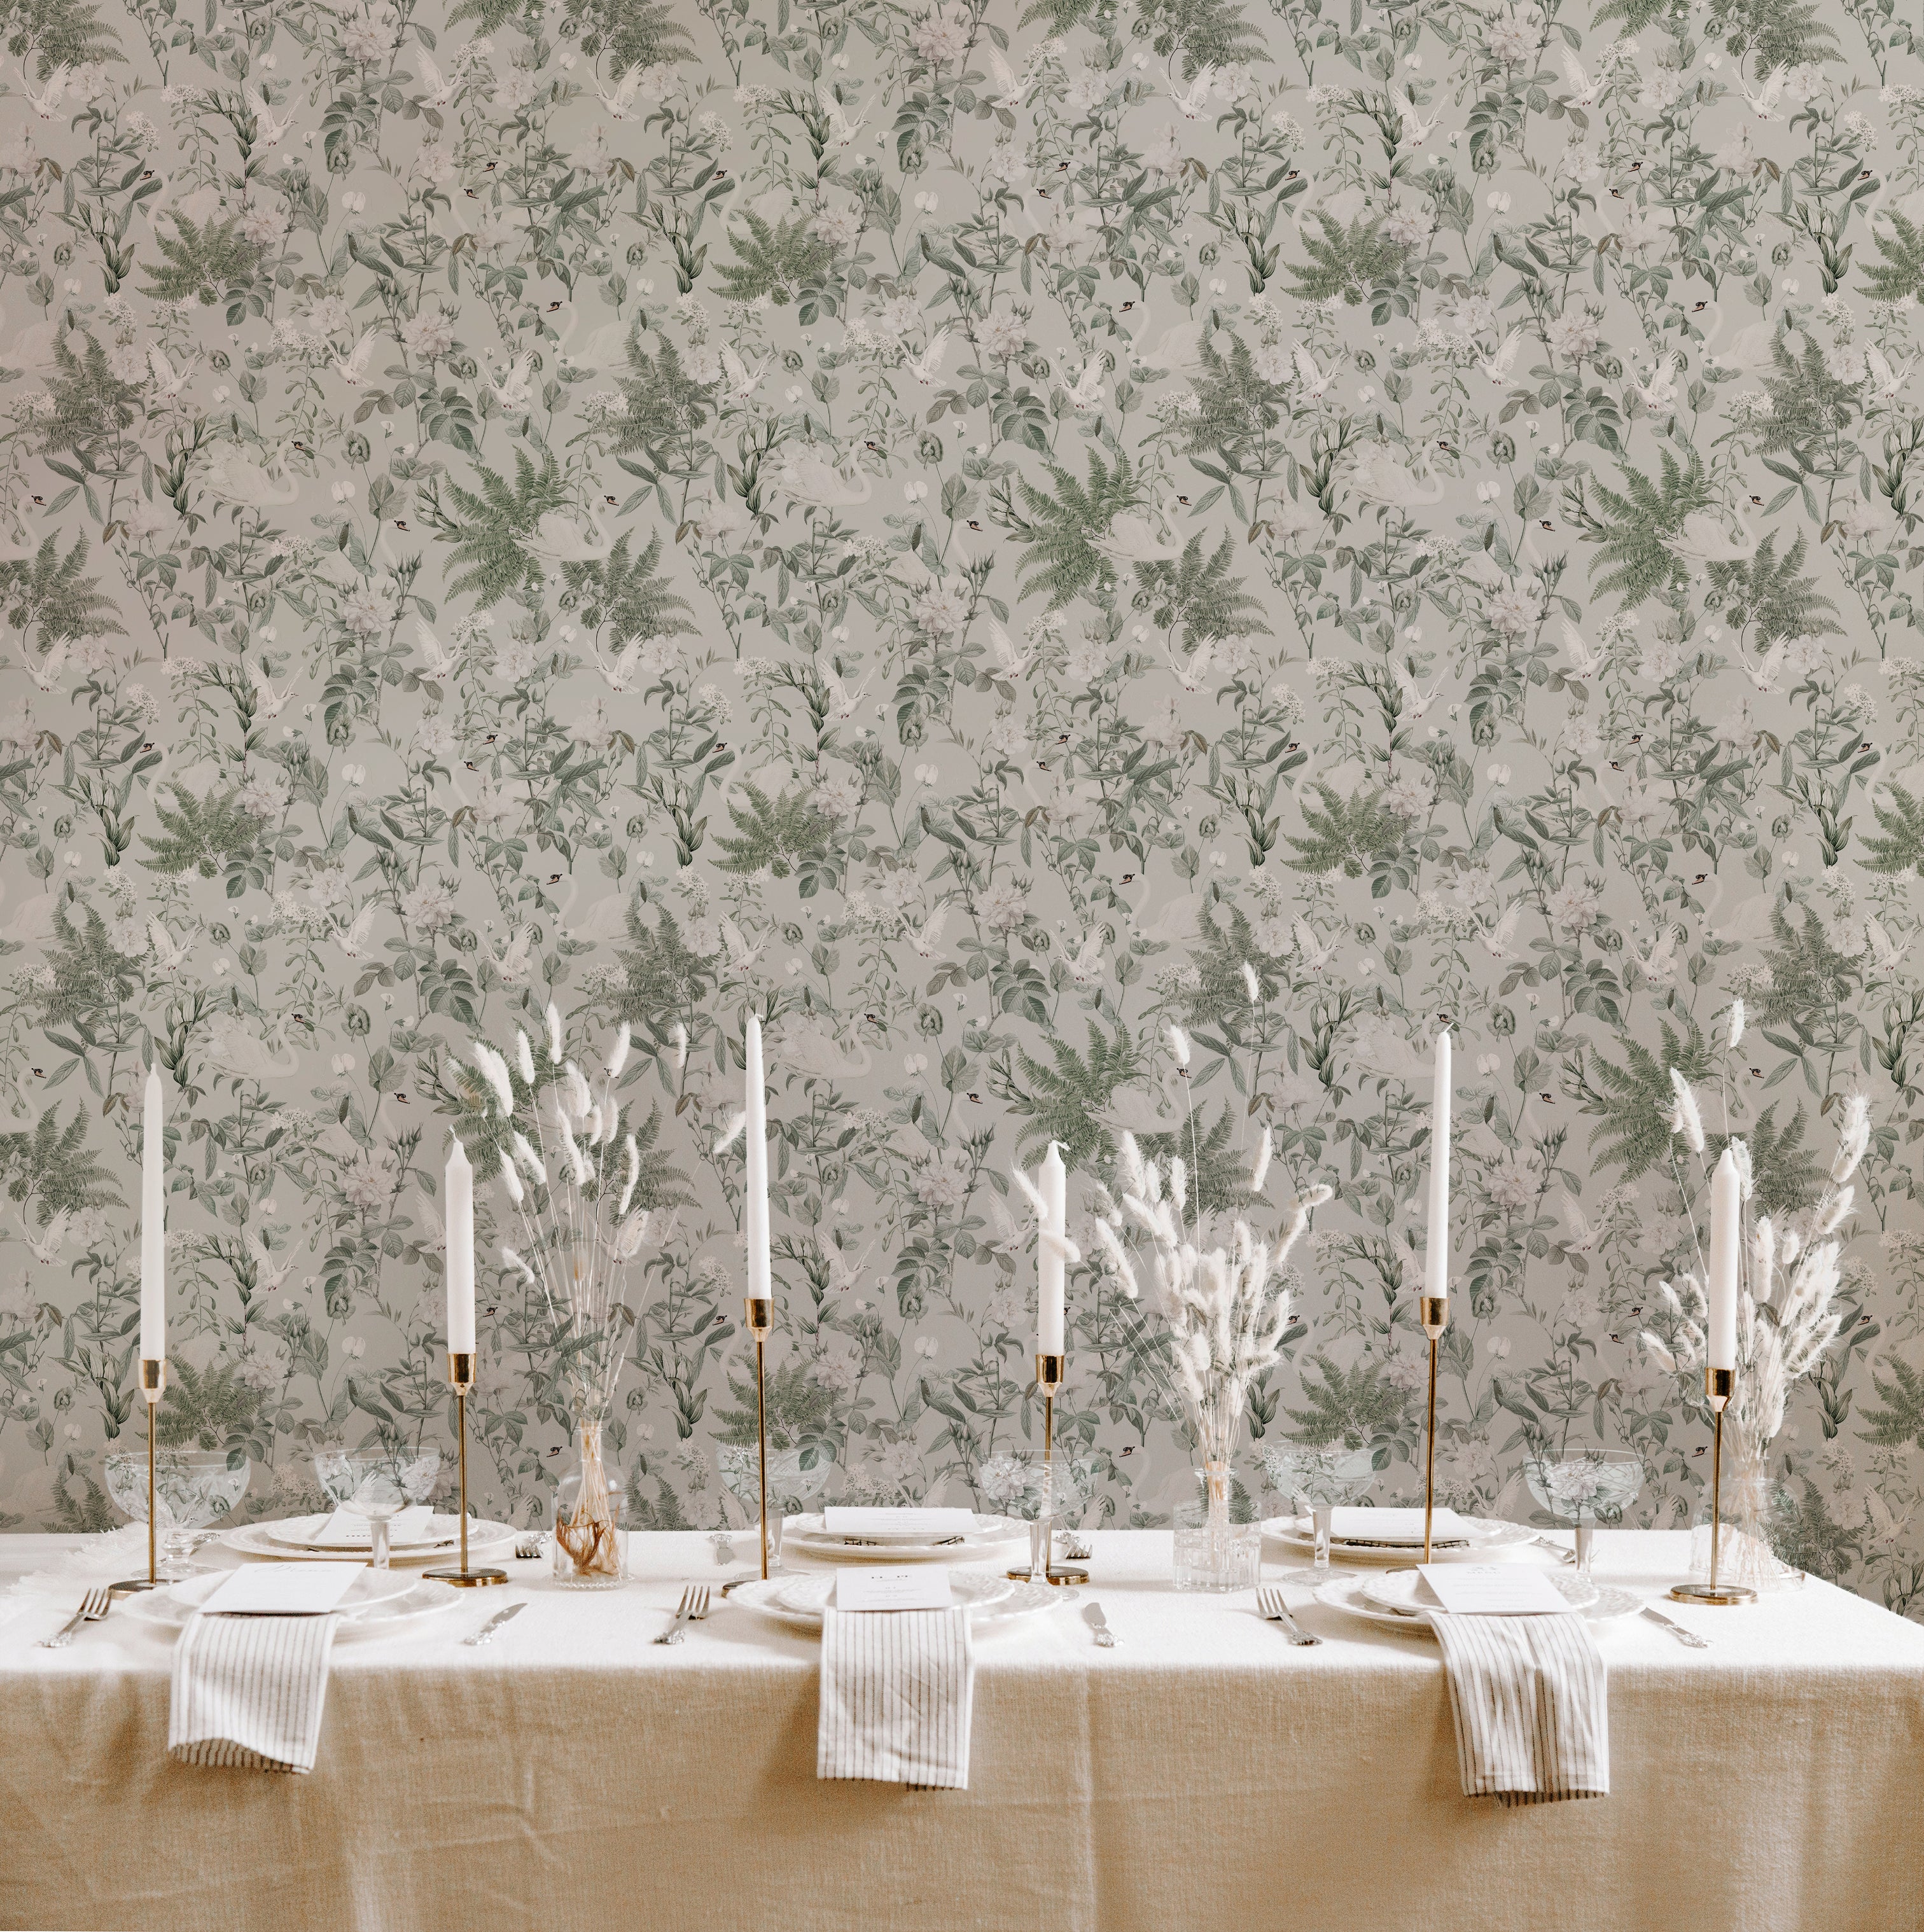 A dining room beautifully decorated with Sage Bird Wallpaper, creating a tranquil and refined atmosphere. The wallpaper's detailed botanical and bird motifs in shades of green and white complement the classic and elegant dining setup.